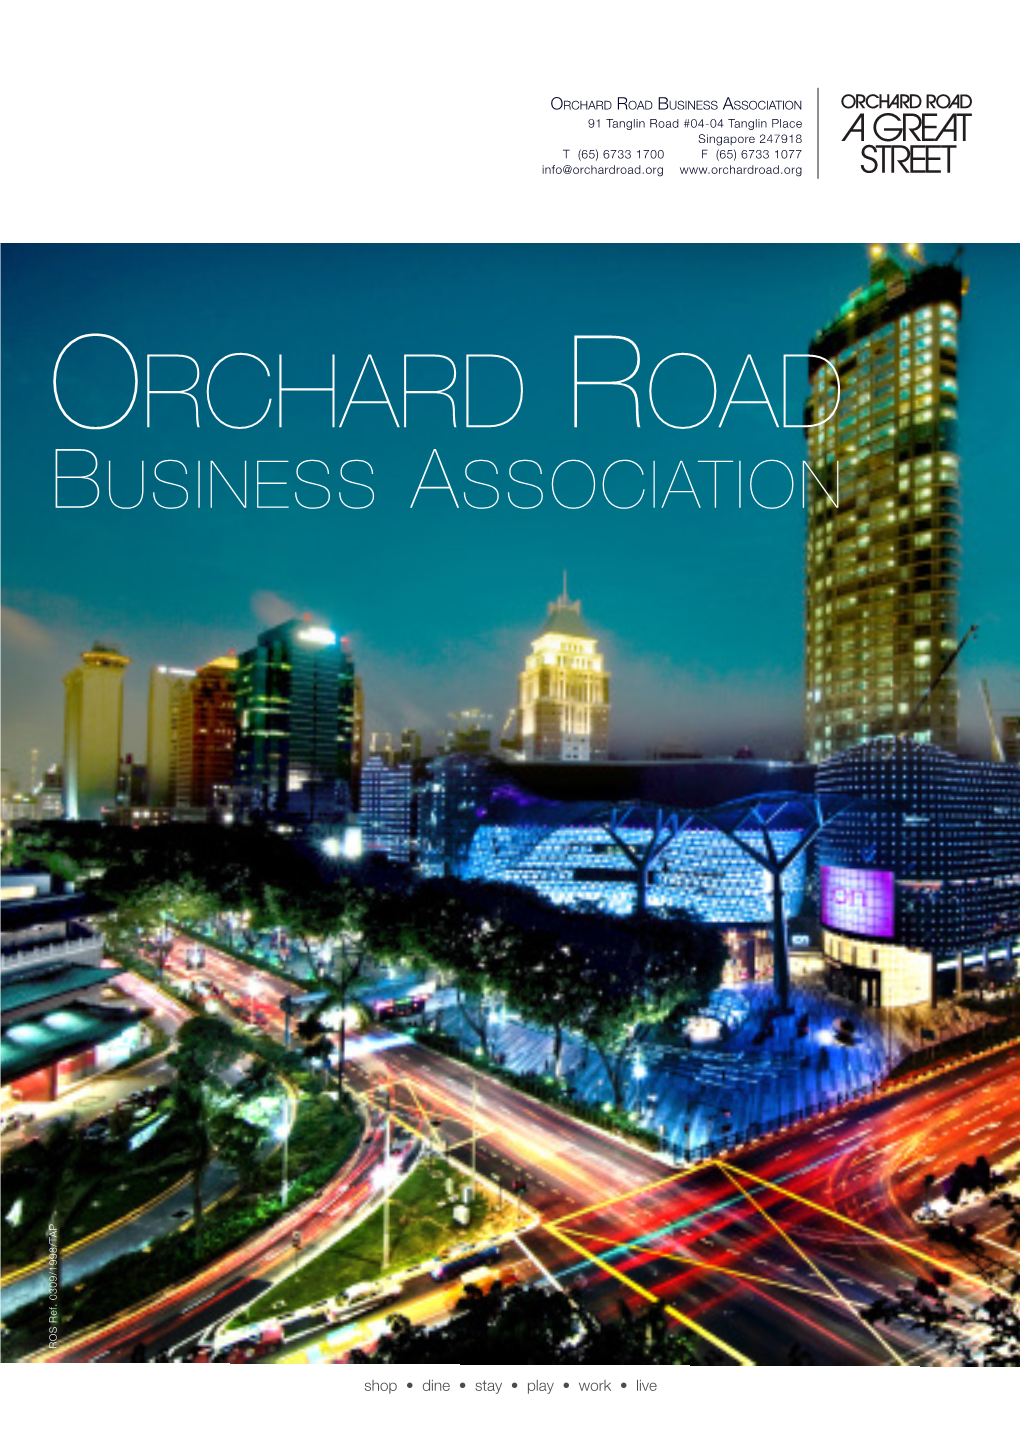 Orchard Road Business Association 91 Tanglin Road #04-04 Tanglin Place Singapore 247918 T (65) 6733 1700 F (65) 6733 1077 Info@Orchardroad.Org